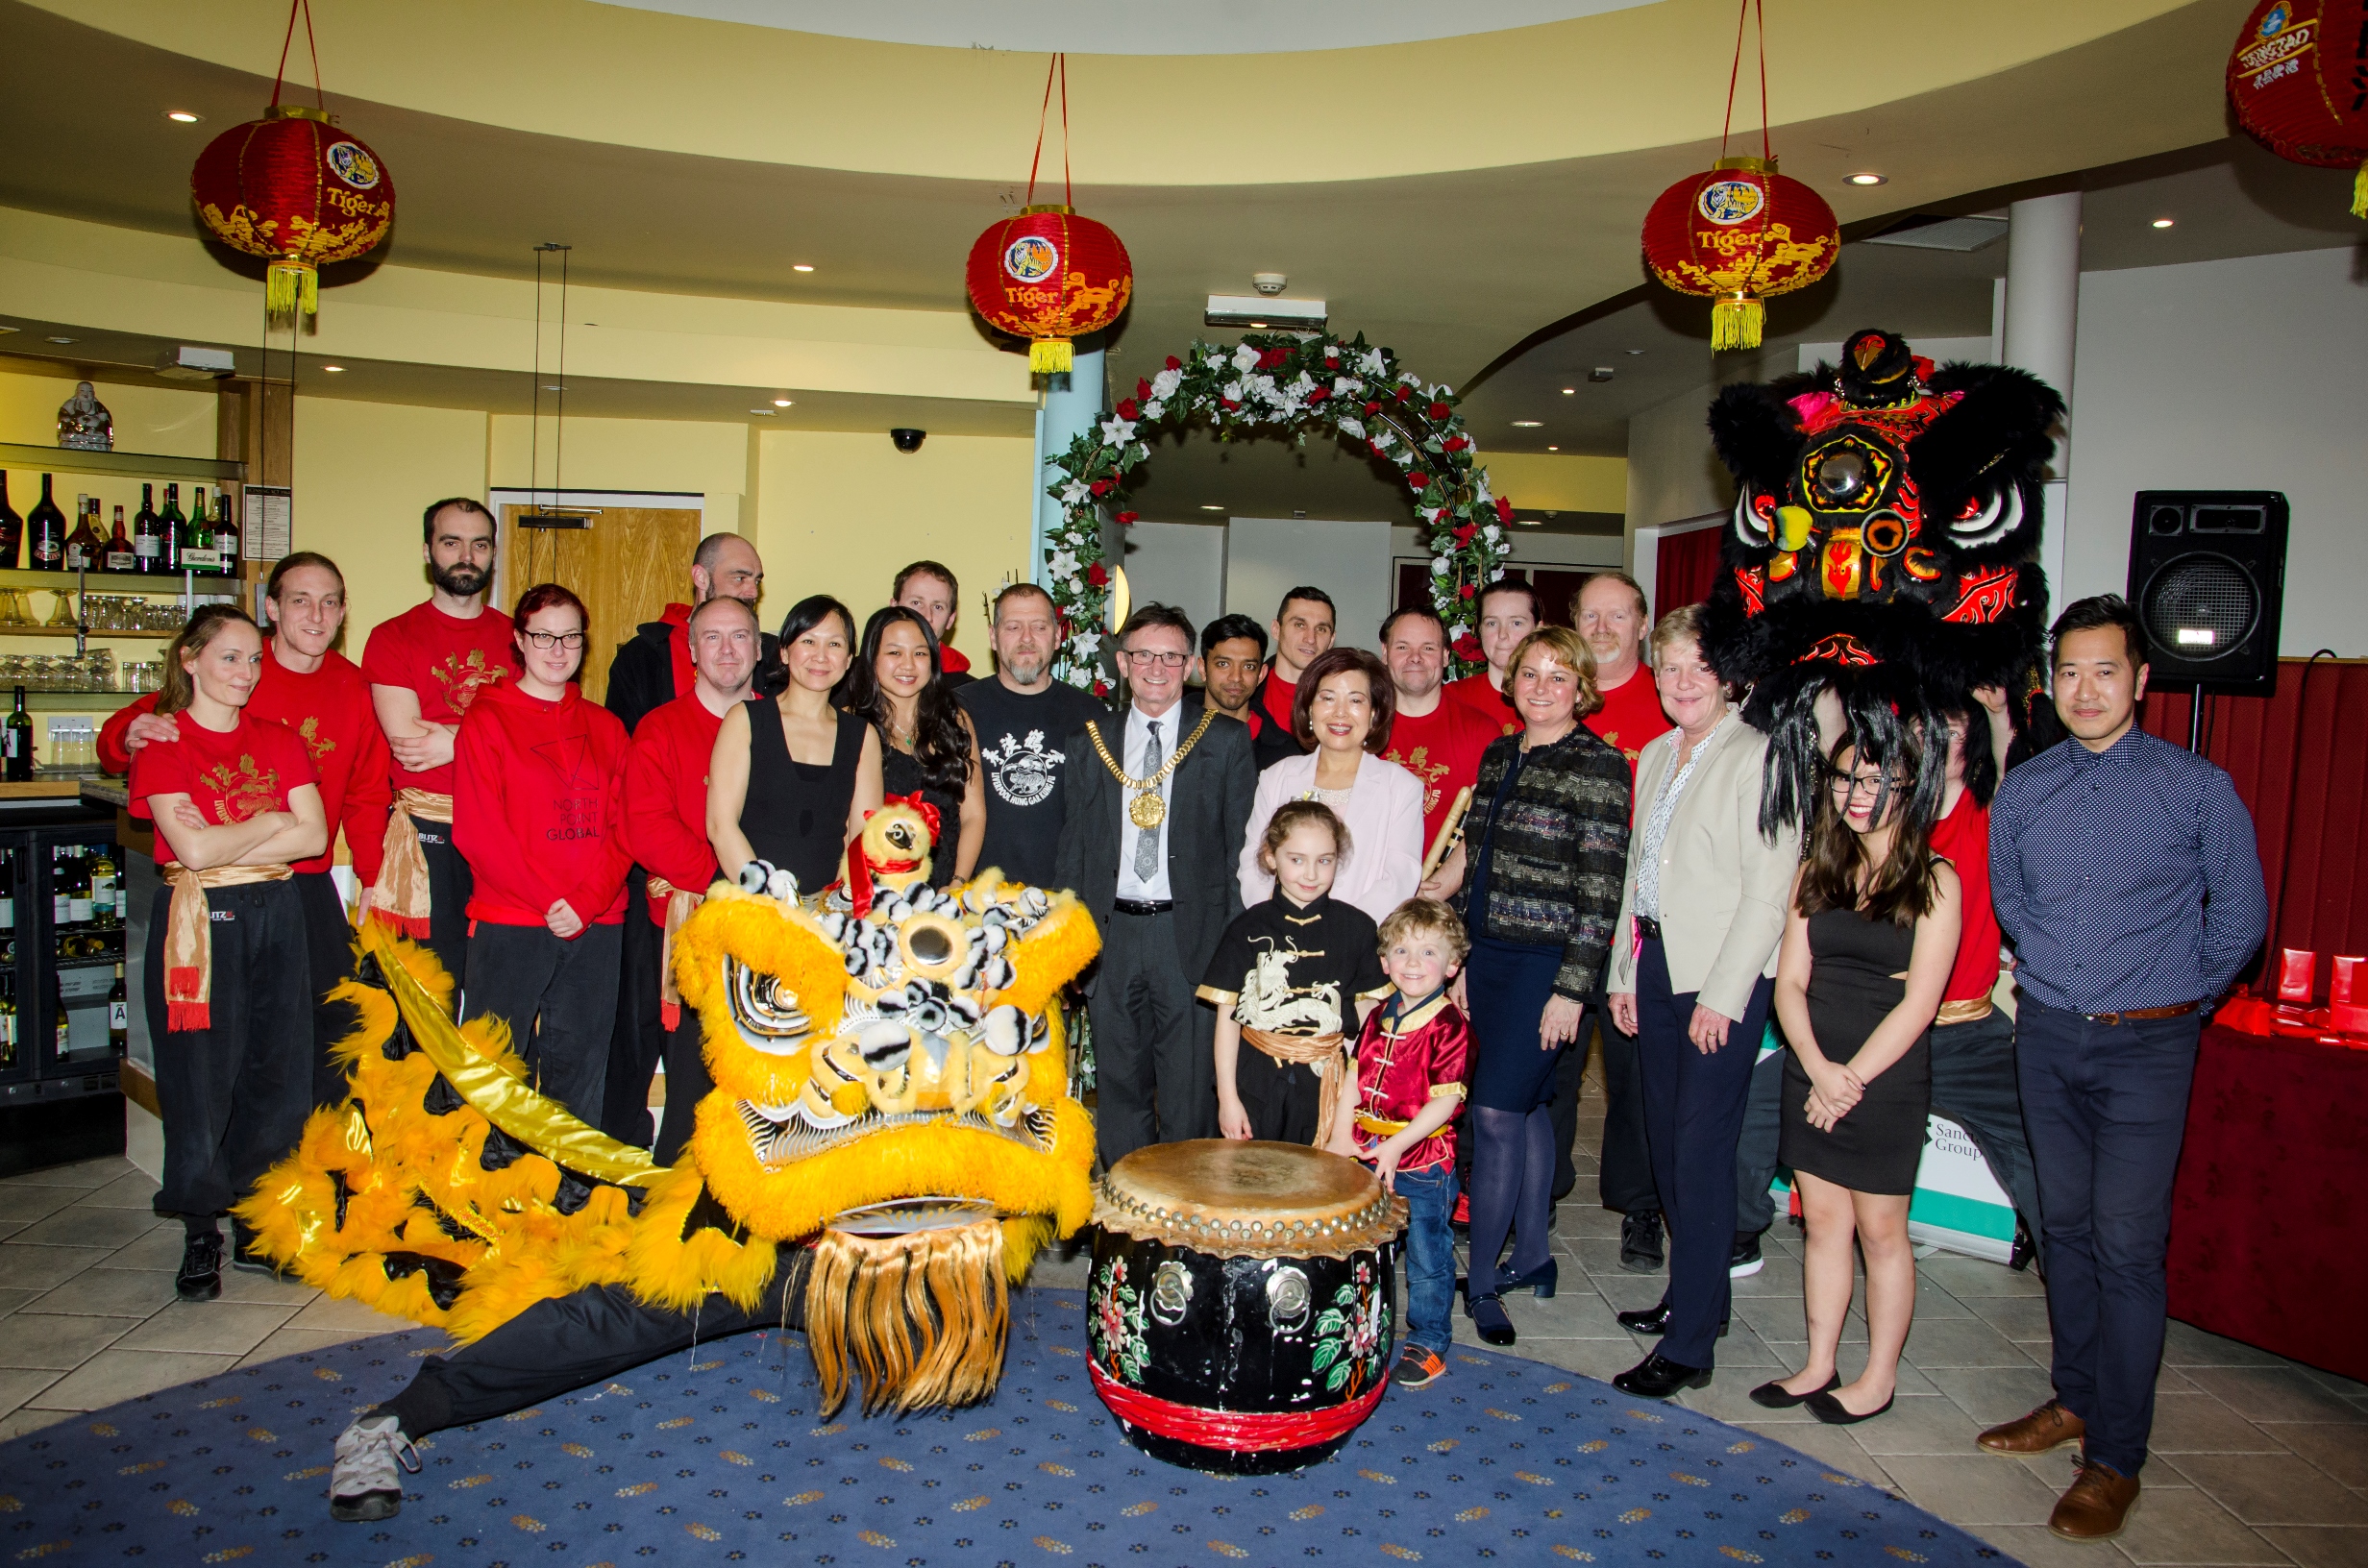  Lord Mayor of Liverpool, Cllr Tony Concepcion, with representatives of HPBC, the Chung Ku restaurant and Liverpool Hung Gar Kung Fu school. 